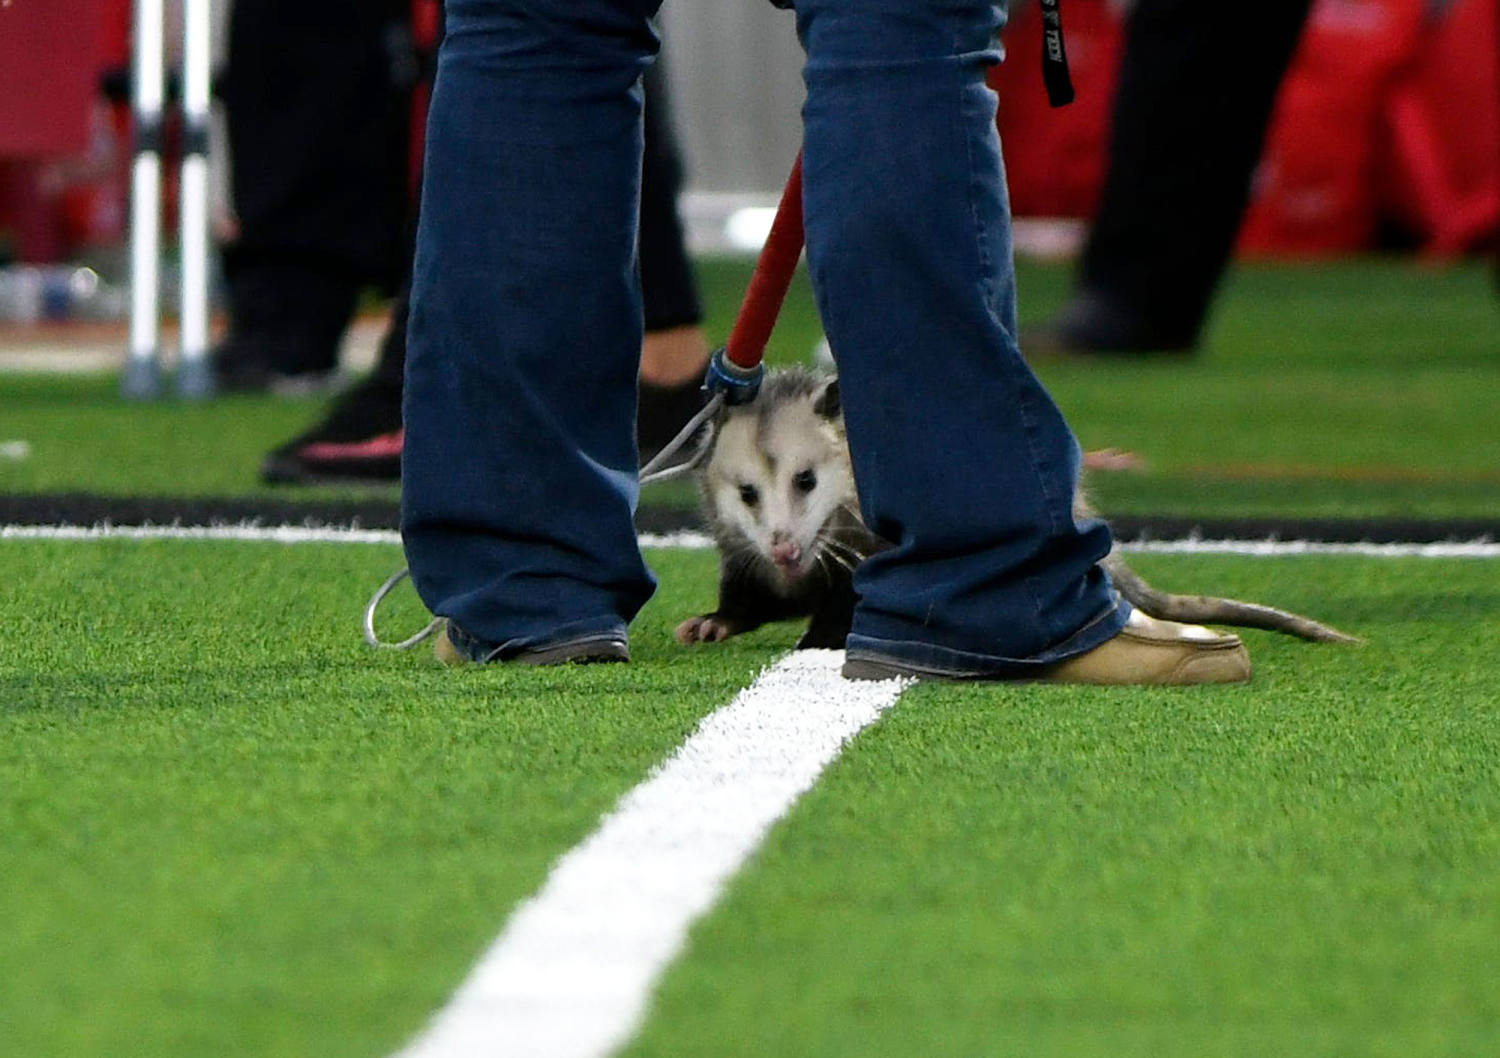 An opossum crashed a college football game in Texas and became a viral star